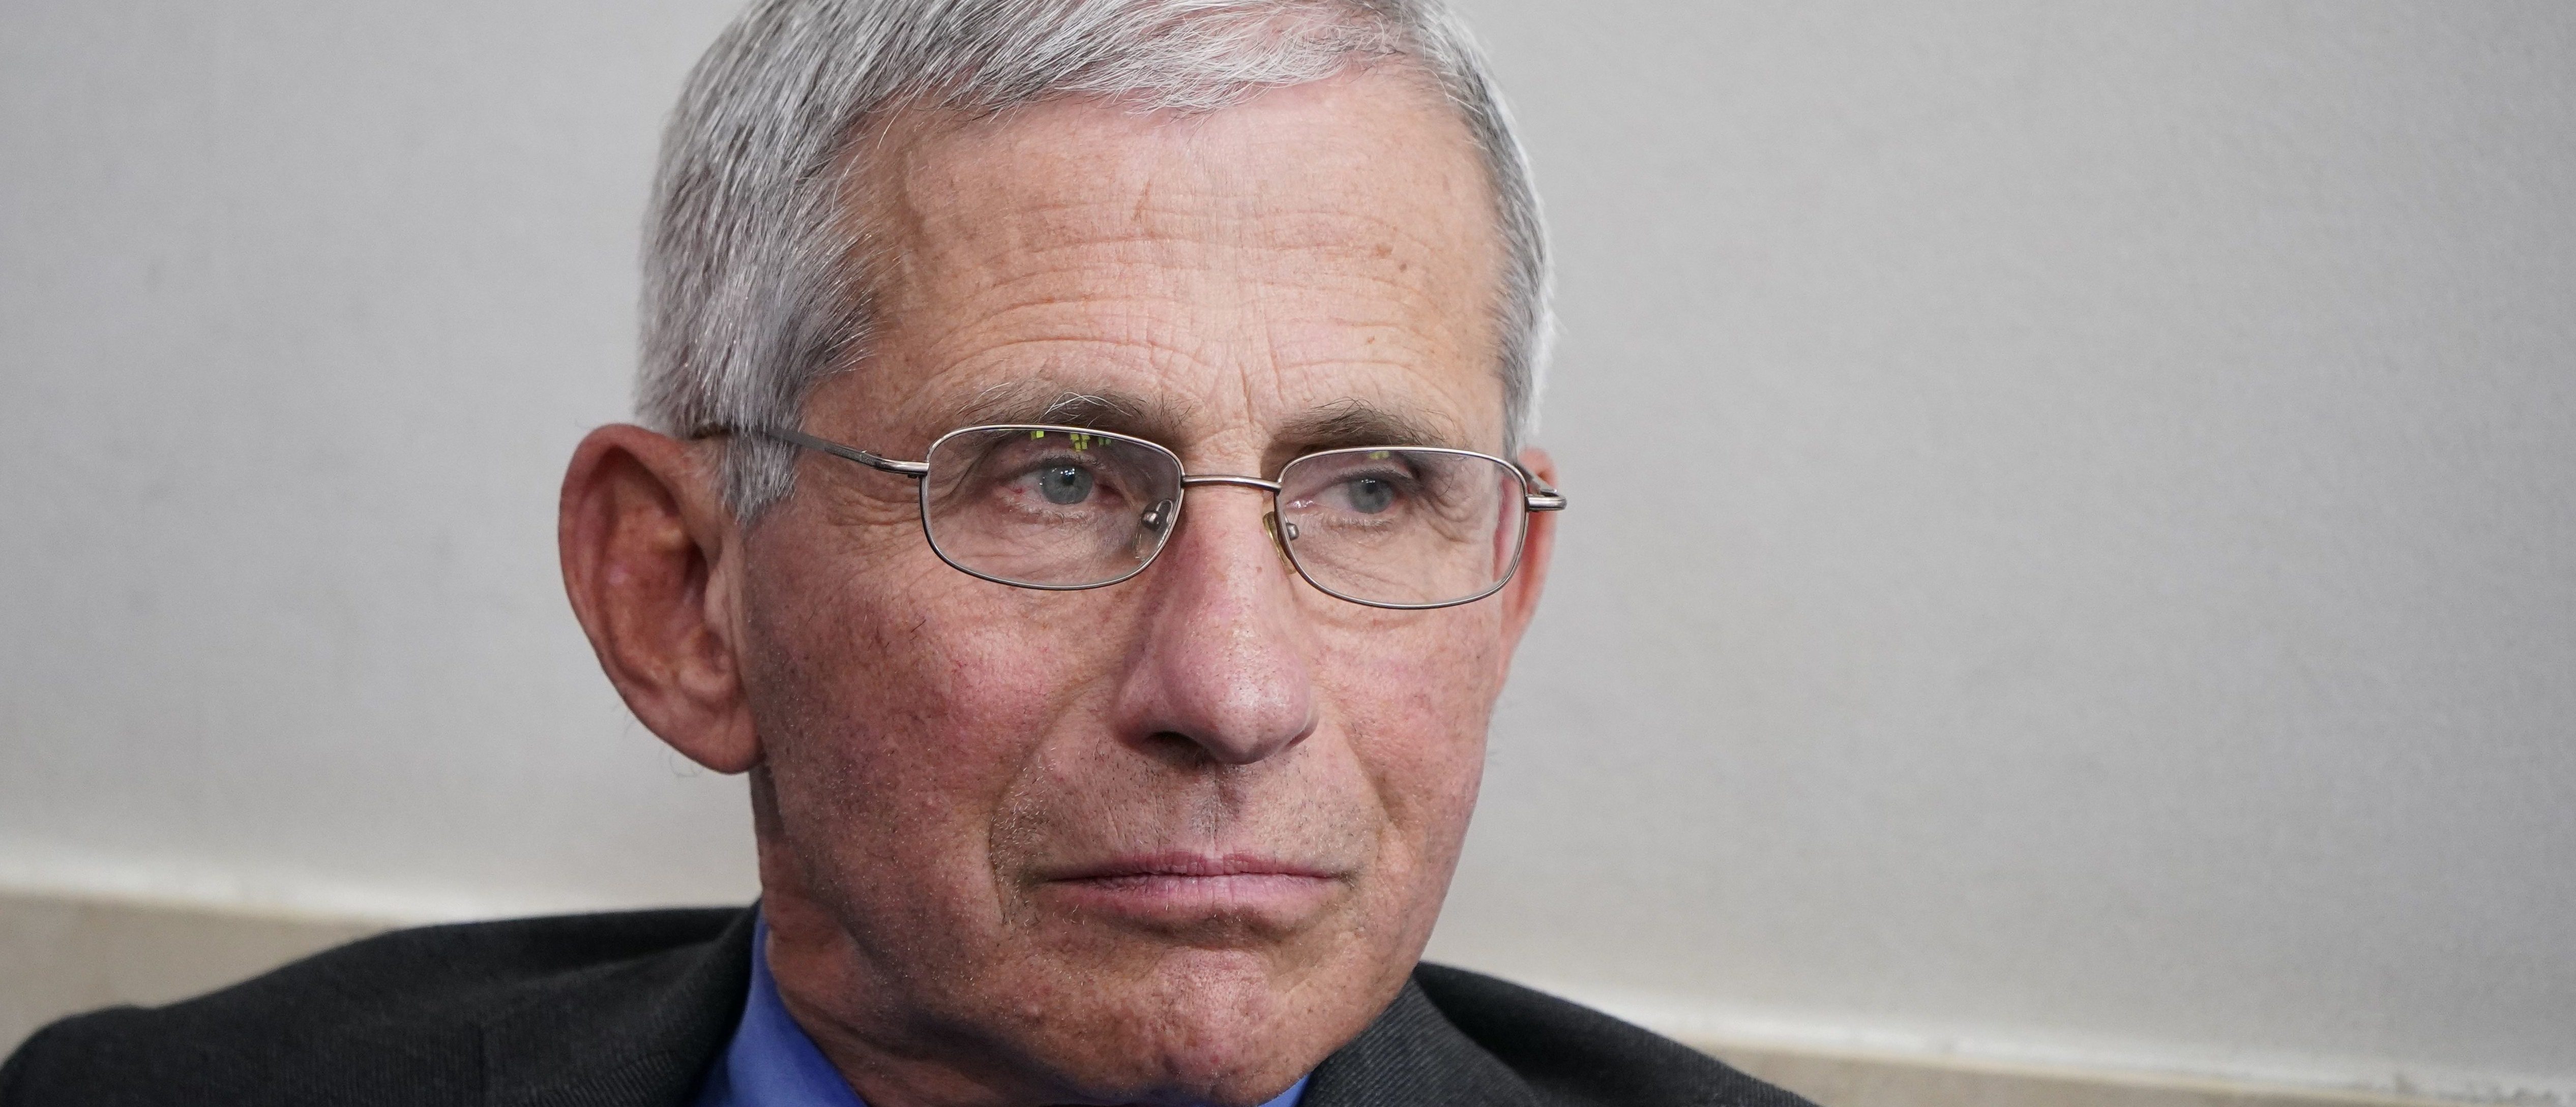 Director of the National Institute of Allergy and Infectious Diseases Anthony Fauci listens during the daily briefing on the novel coronavirus, COVID-19, in the Brady Briefing Room at the White House on April 6, 2020, in Washington, DC. (Photo by MANDEL NGAN/AFP via Getty Images)